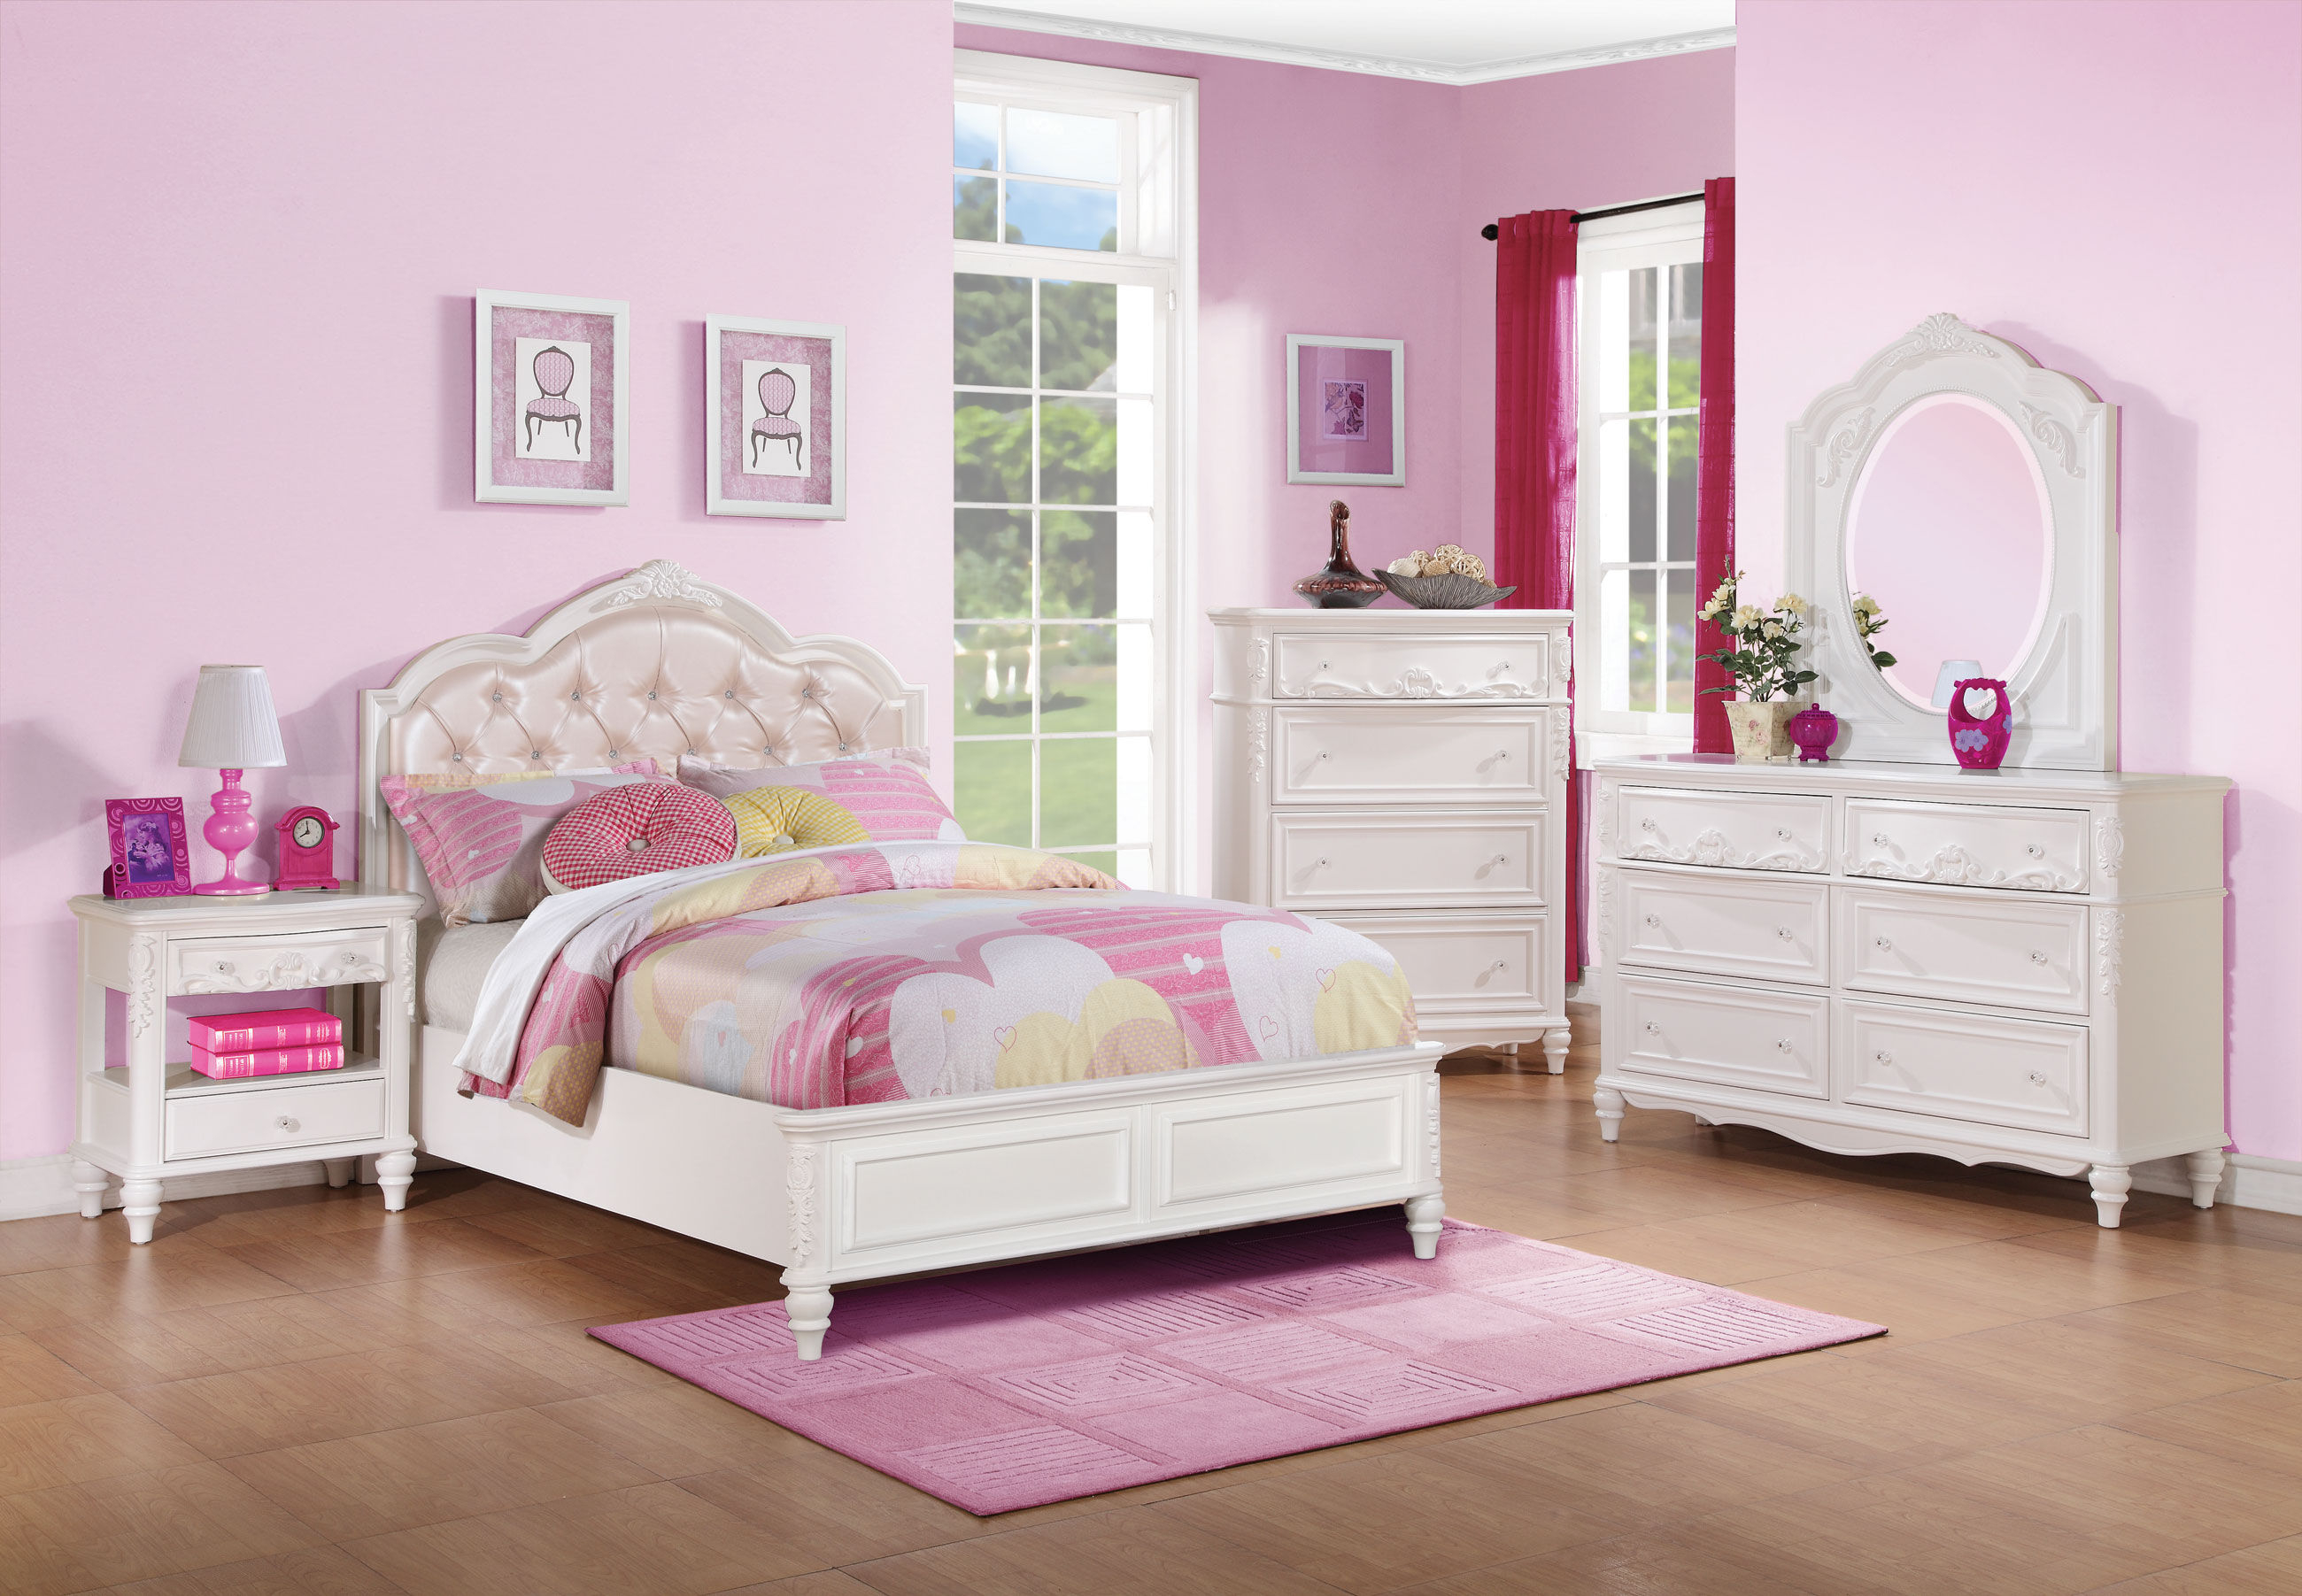 Coaster Furniture Caroline 4pc Kids Bedroom Set With Full Bed within dimensions 2600 X 1803